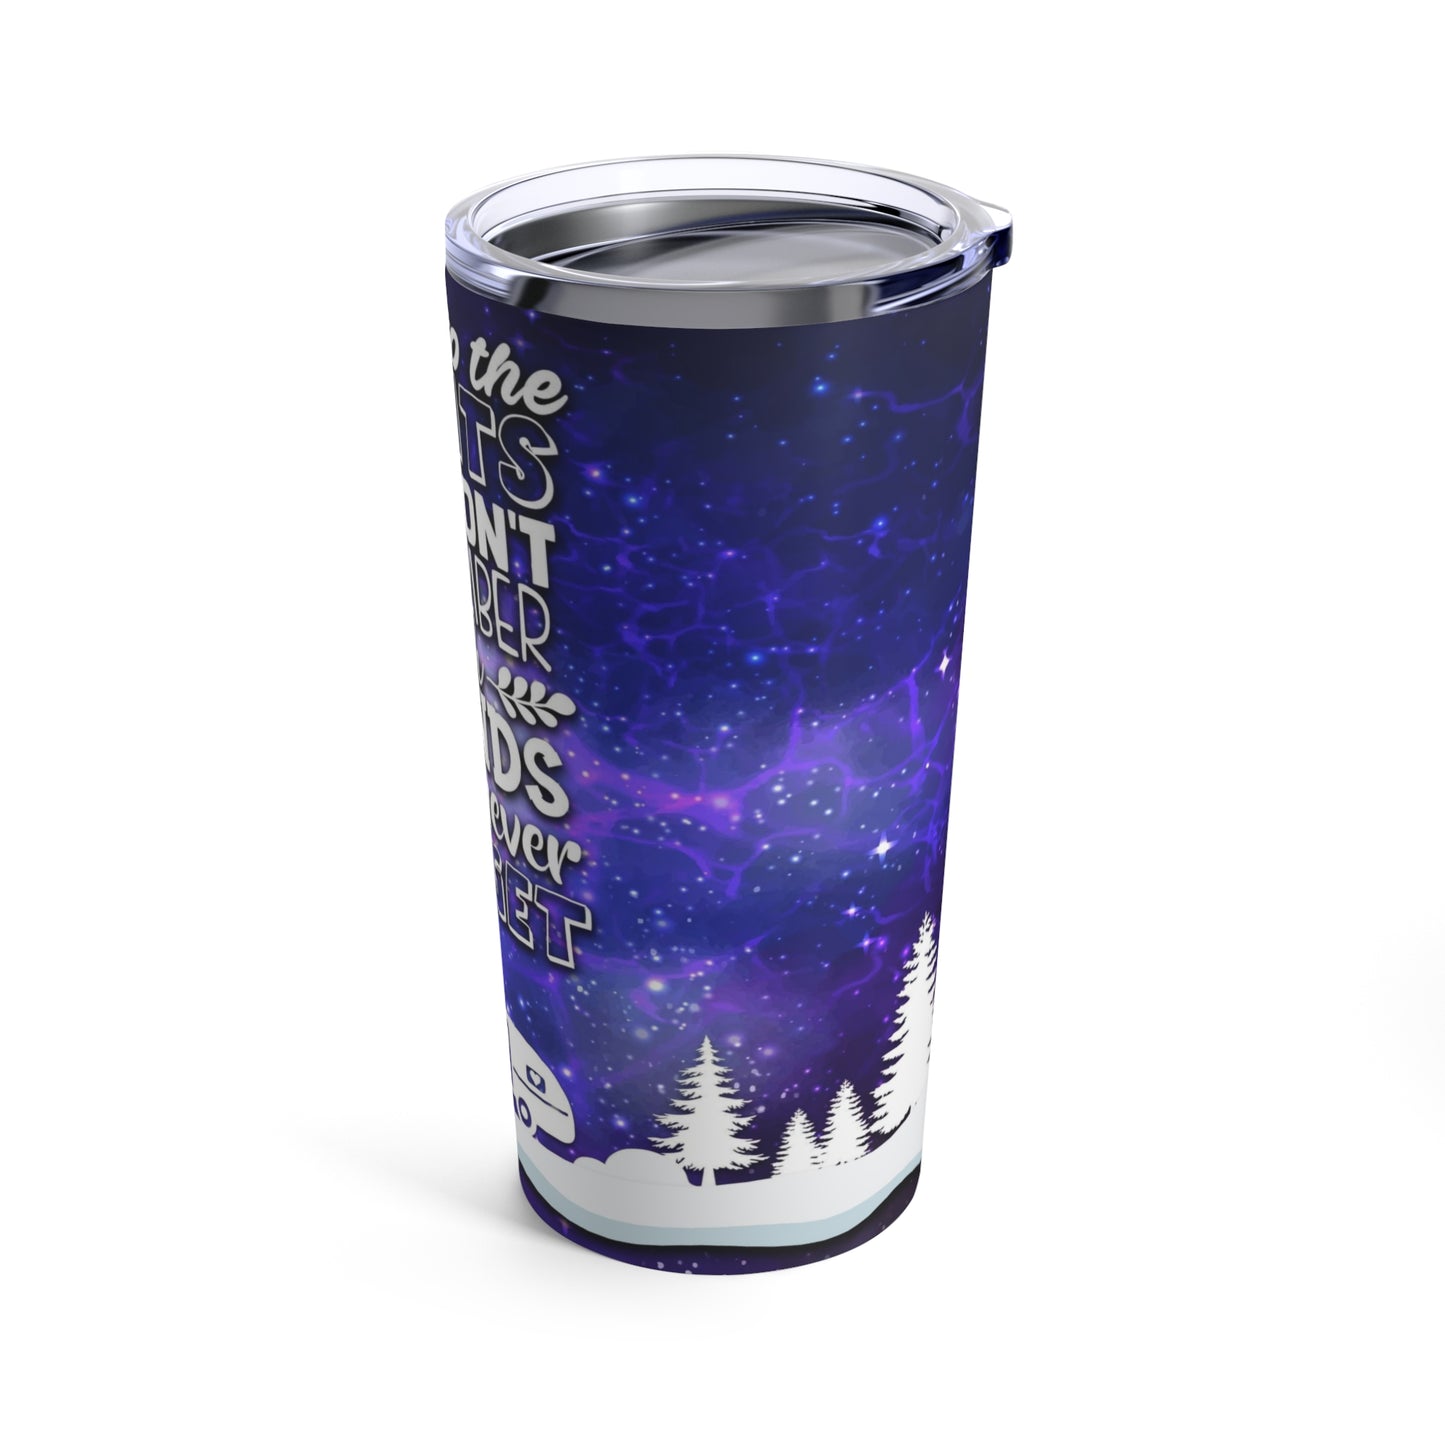 " Here's To The Nights We Won't Remember With Friends We'll Never Forget " Tumbler 20oz